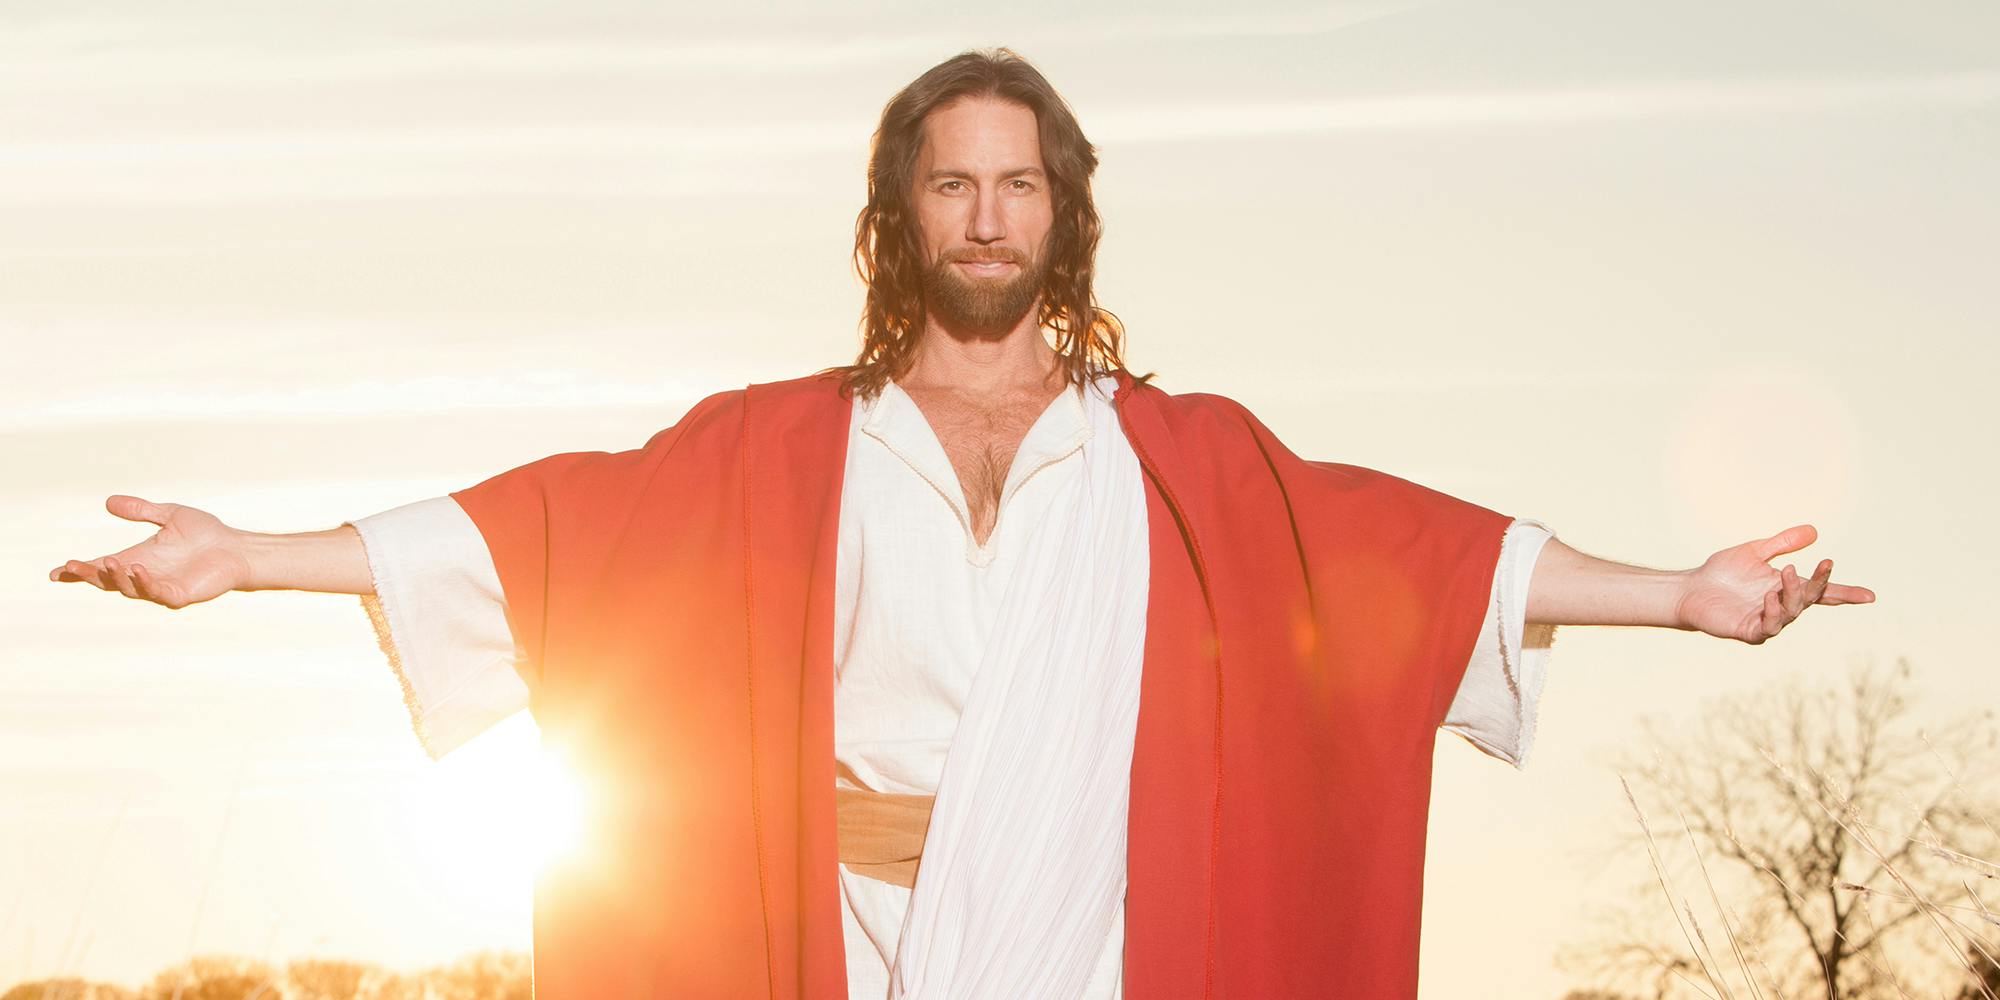 Righteous Jesus memes to save your soul